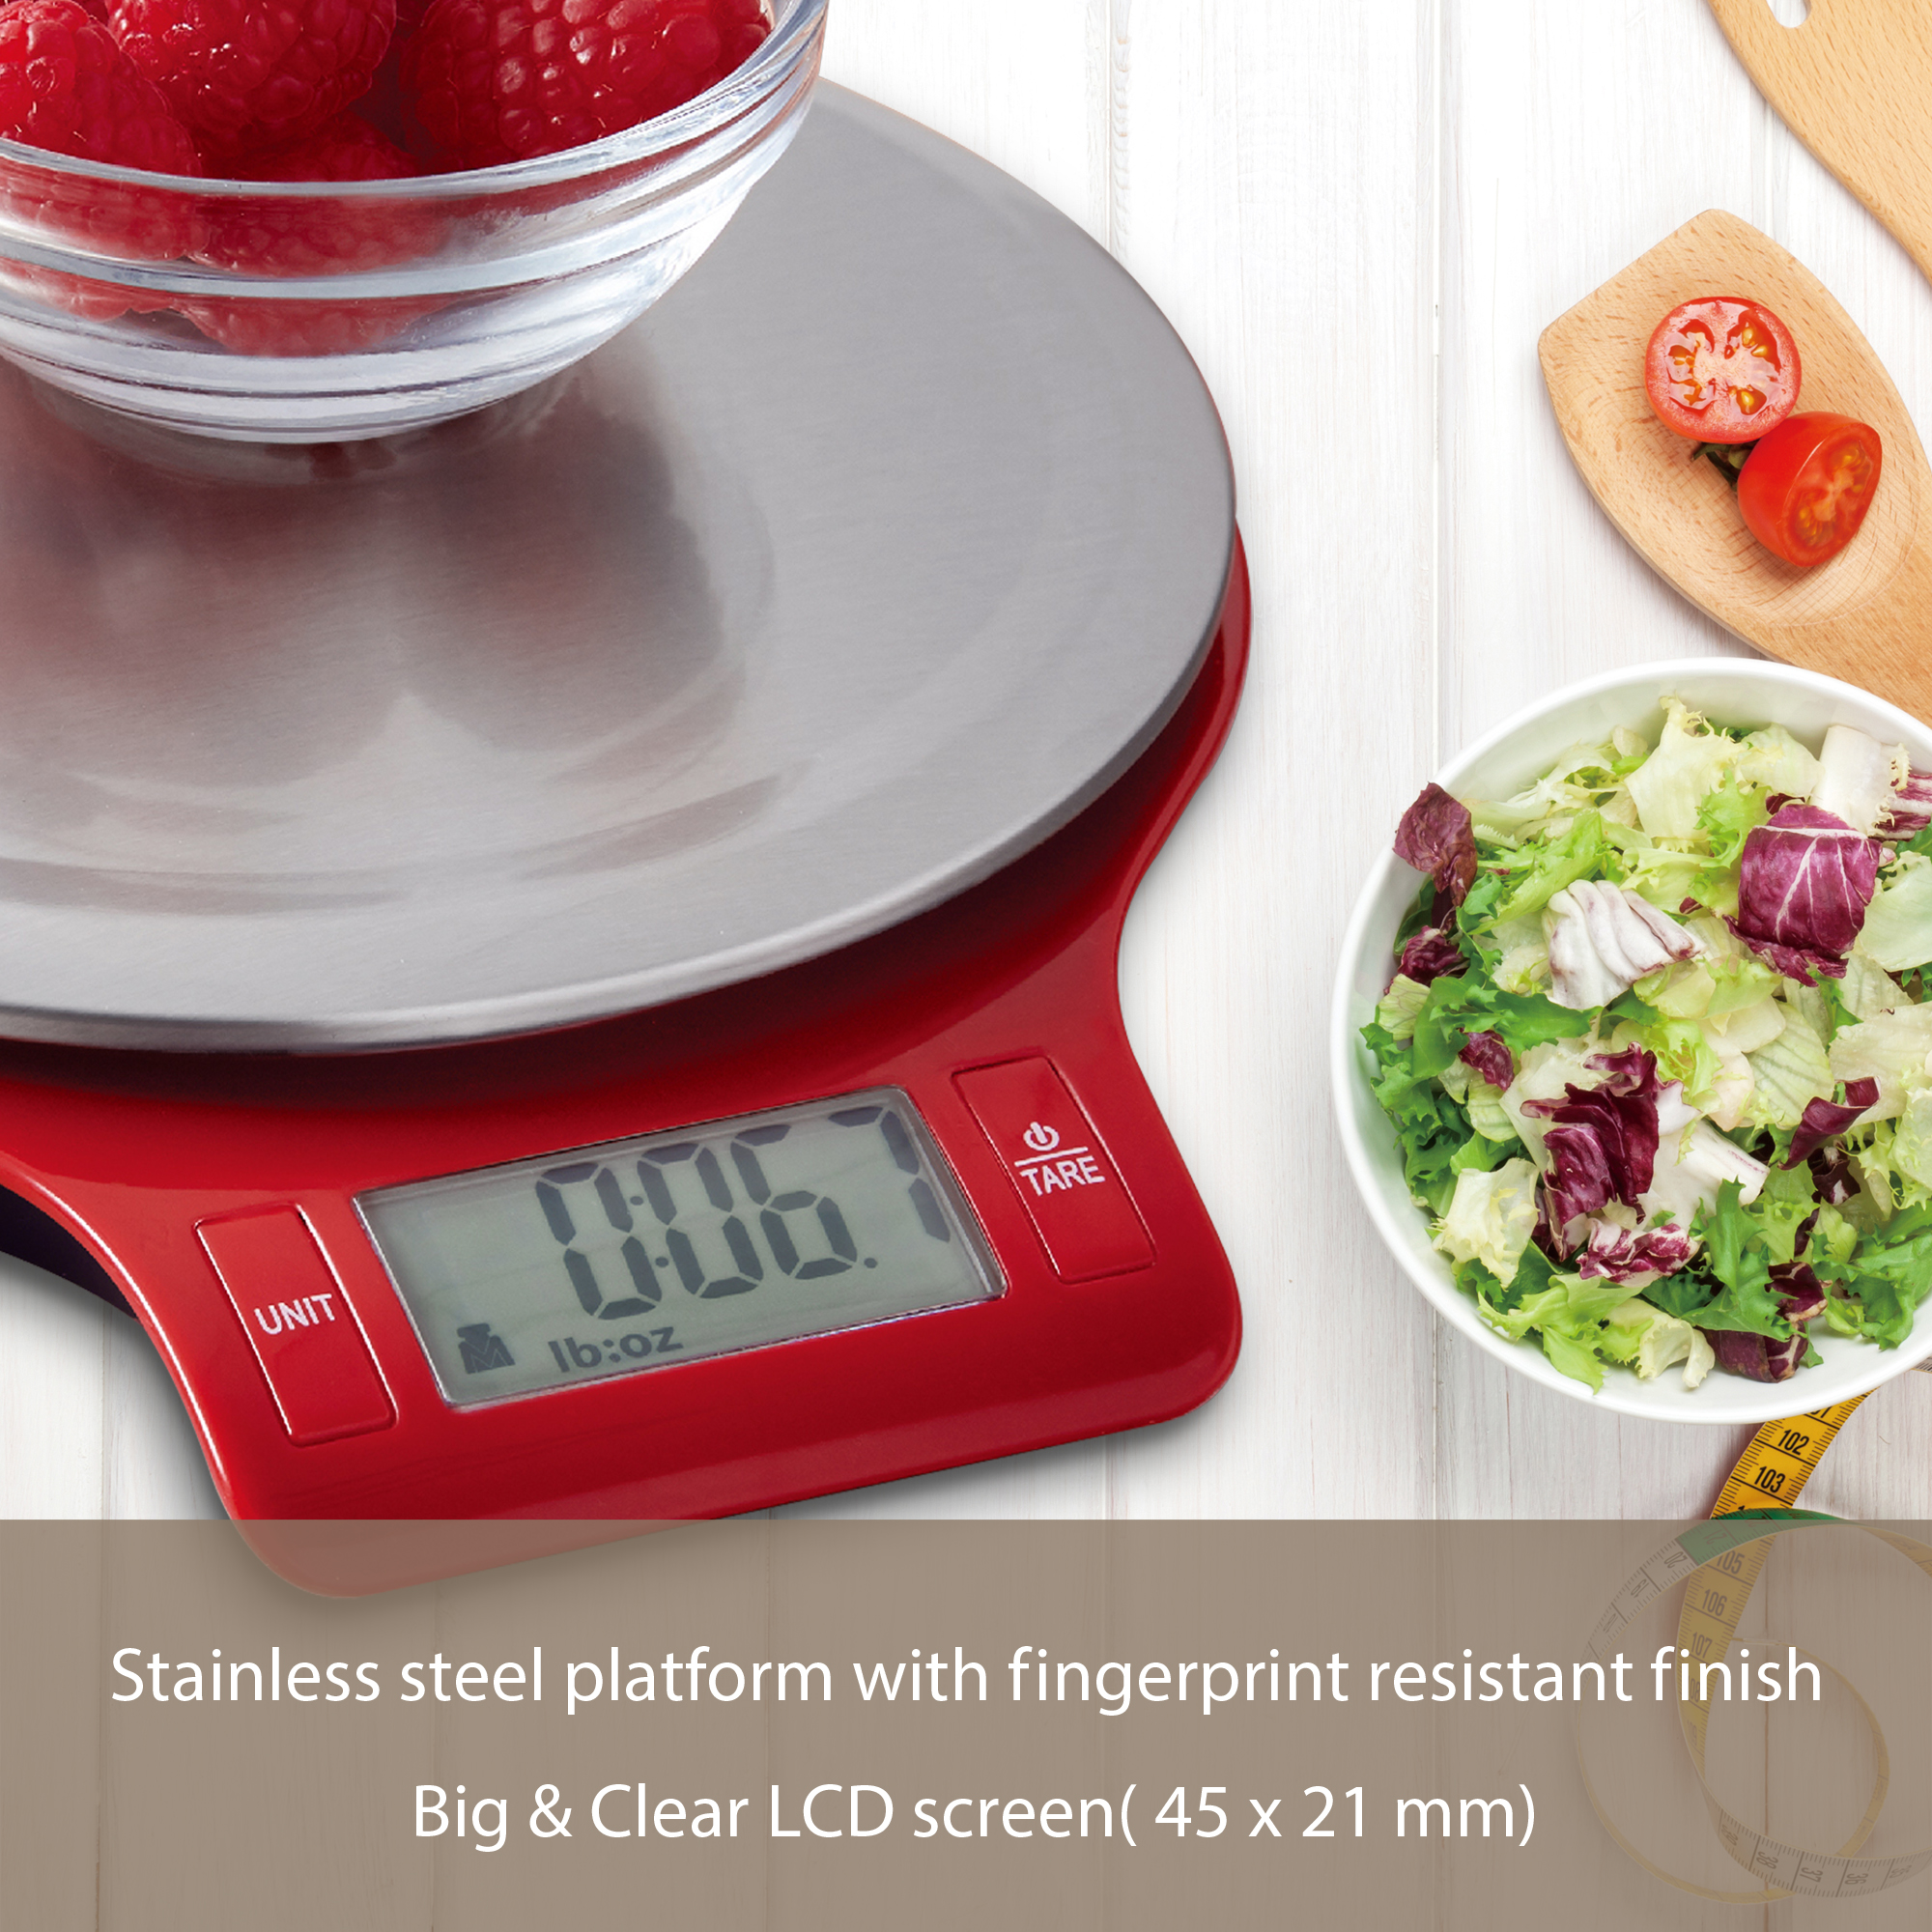 Mainstays Round Stainless Steel Digital Kitchen Scale, Red - image 5 of 11